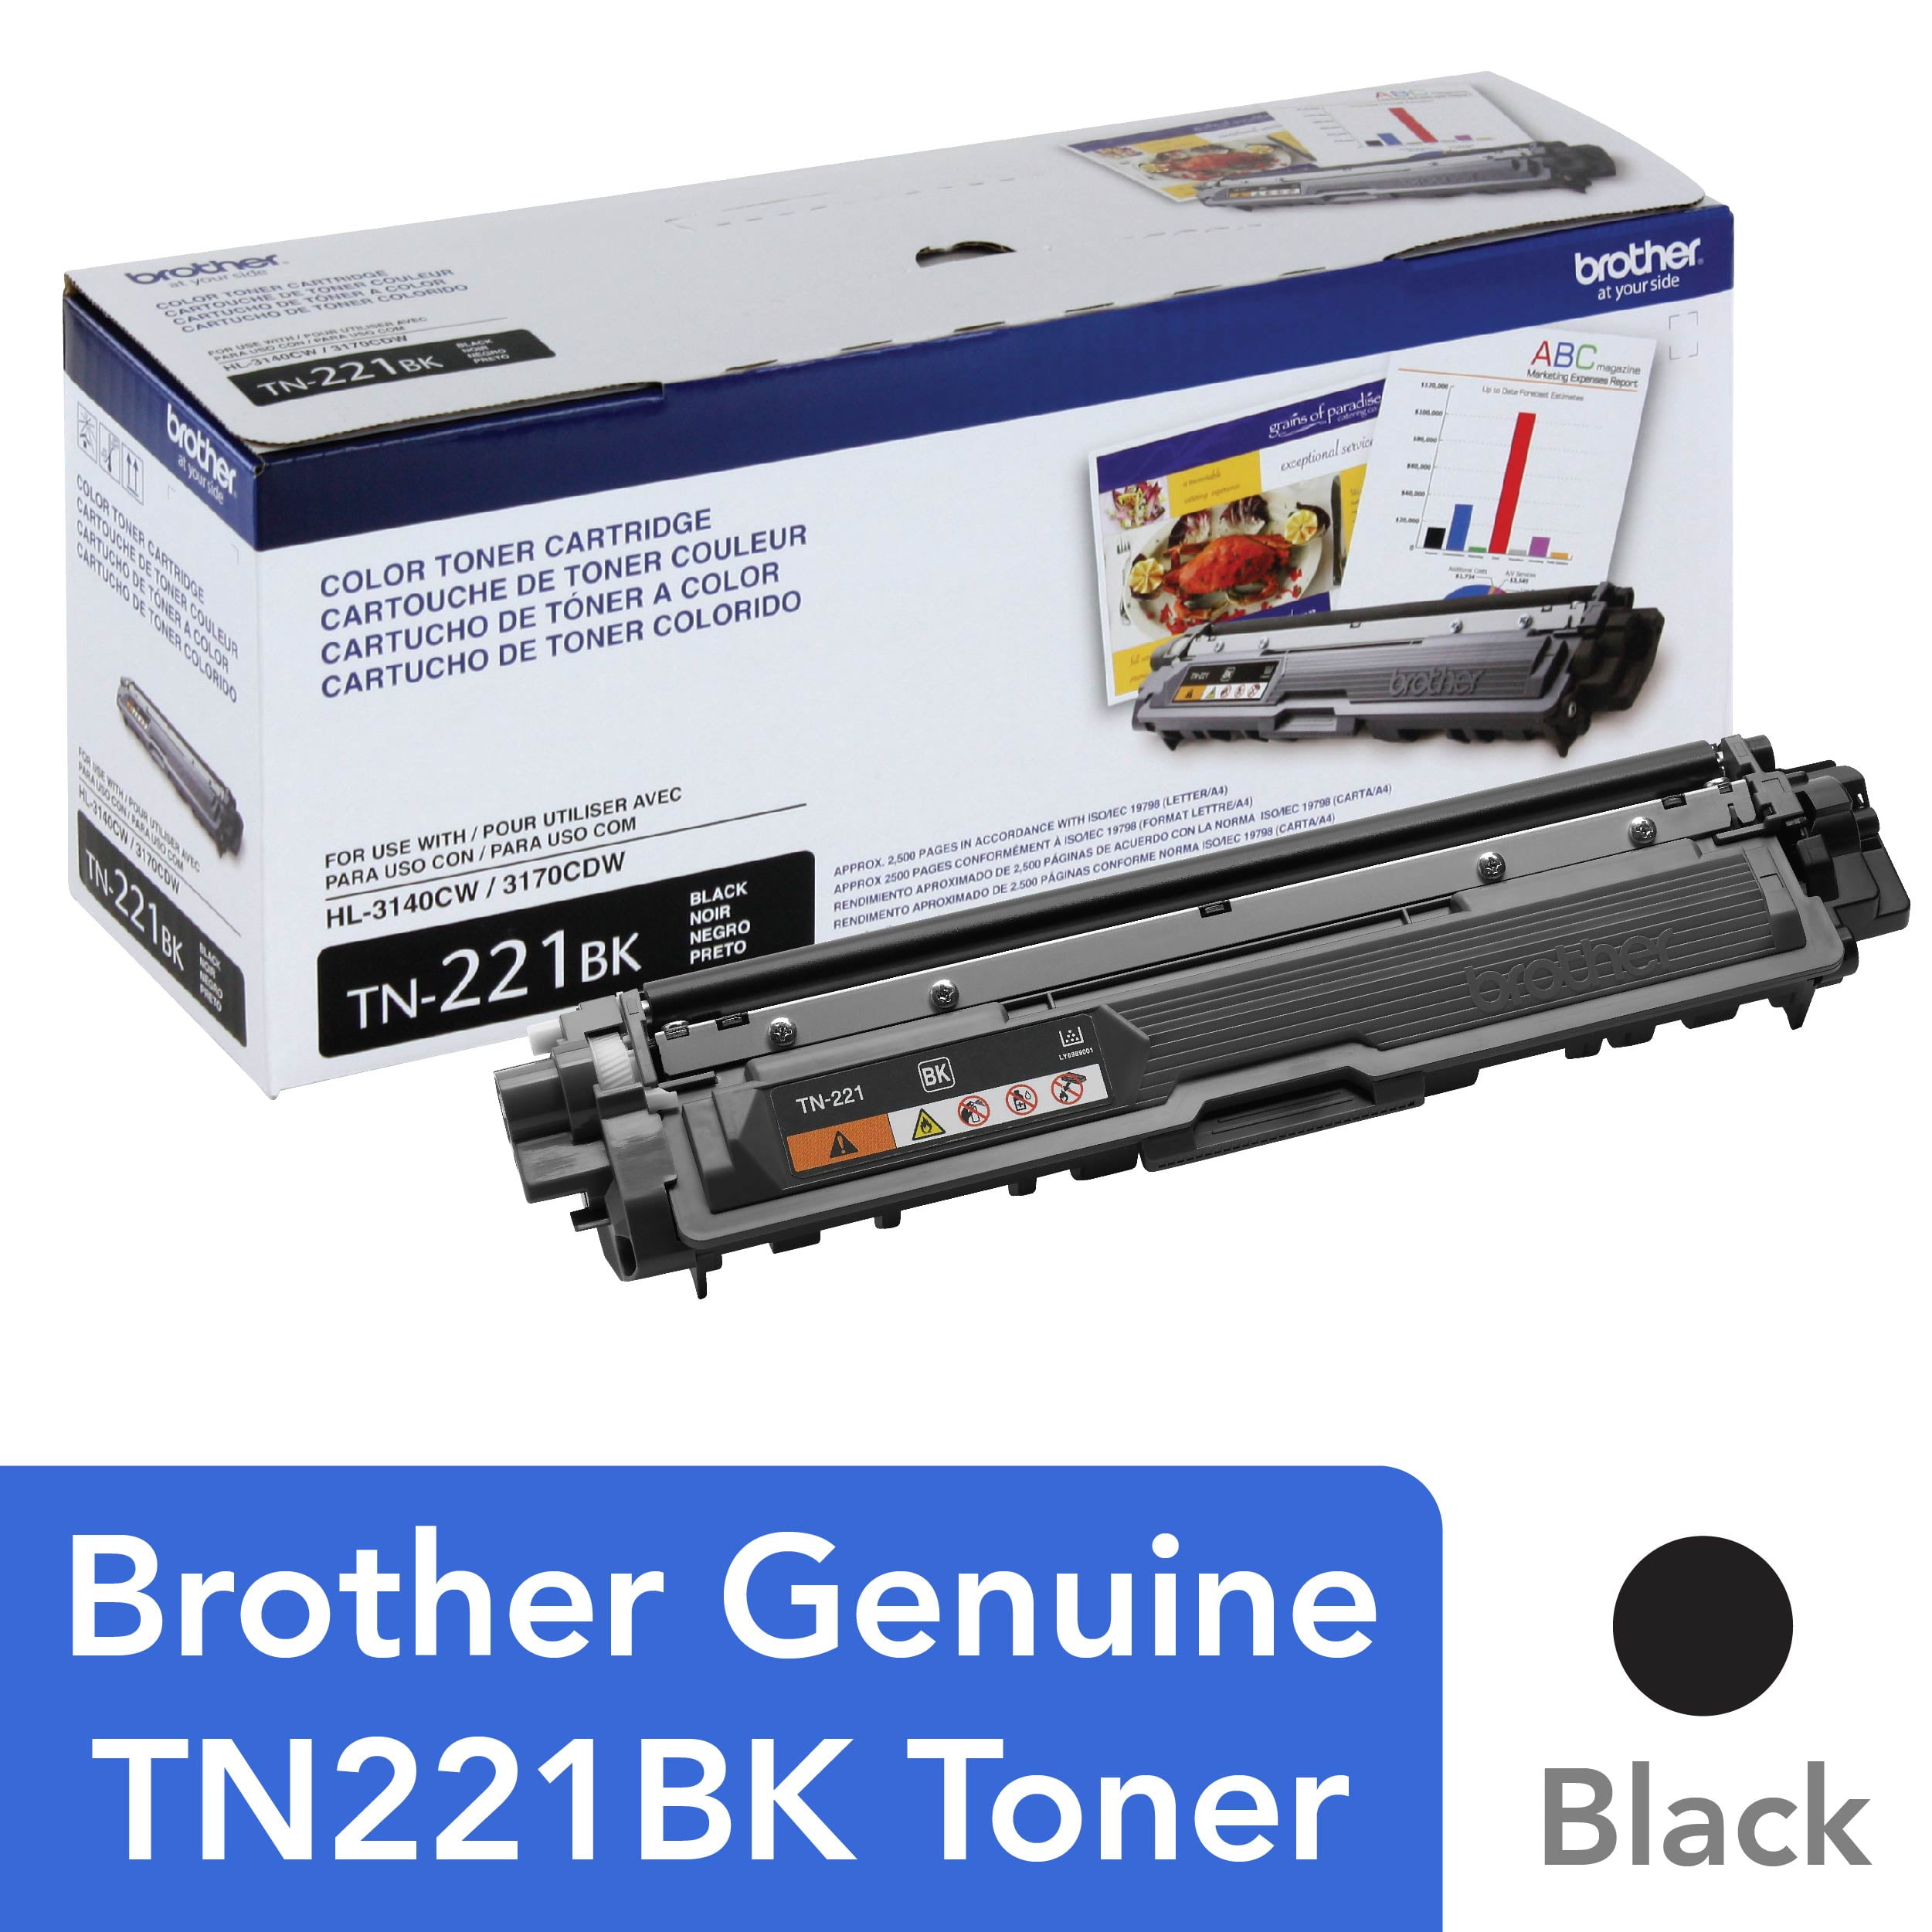  HALLOLUX TN-241 TN-245 Toner Cartridges Replacement for Brother  TN241 TN245 Compatible with 9015CDW 9020CDW 9022CDW 3140CW 3142CW 3150CDN  3150CDW 3170CDW (Black Cyan Magenta Yellow, 4Pack) : Office Products